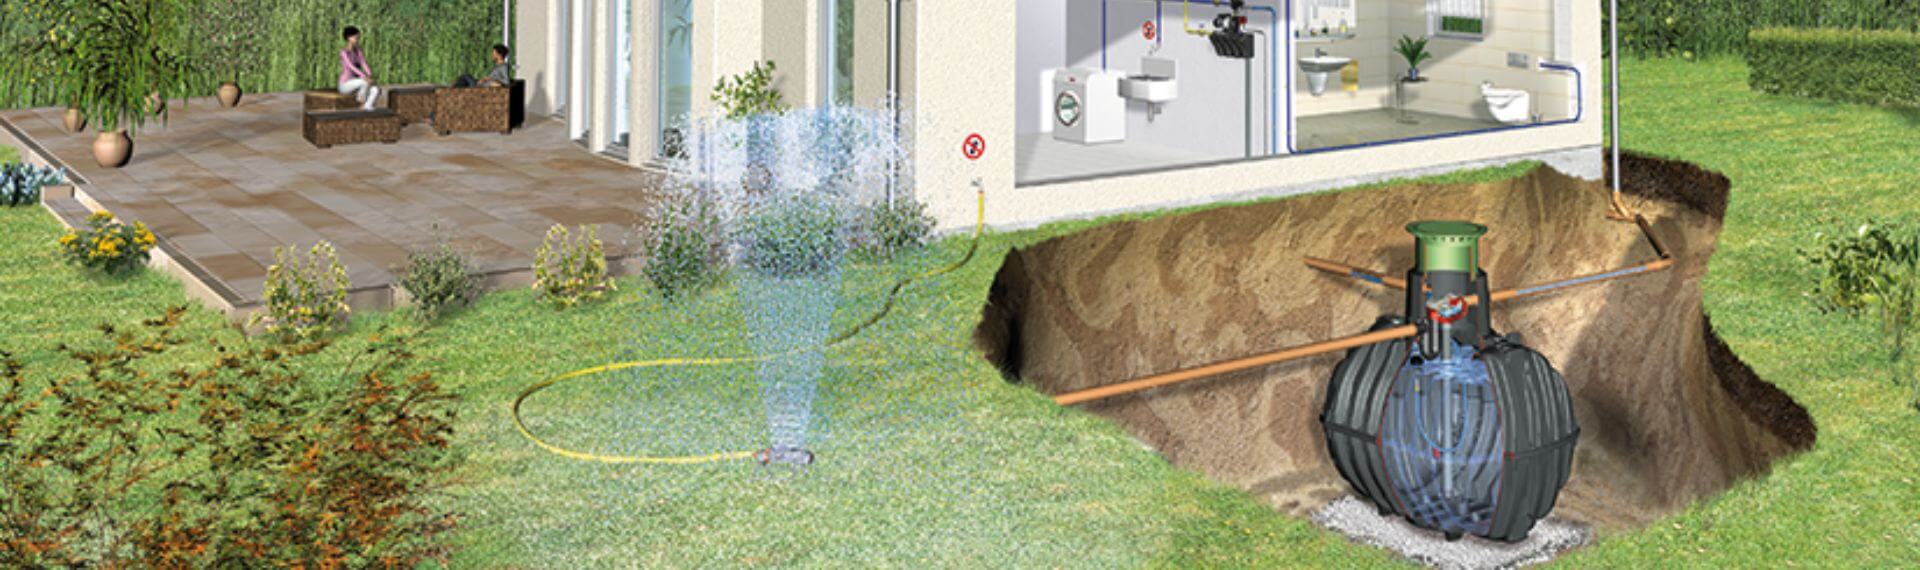 What Is The Difference Between Greywater Recycling and Rainwater Harvesting?